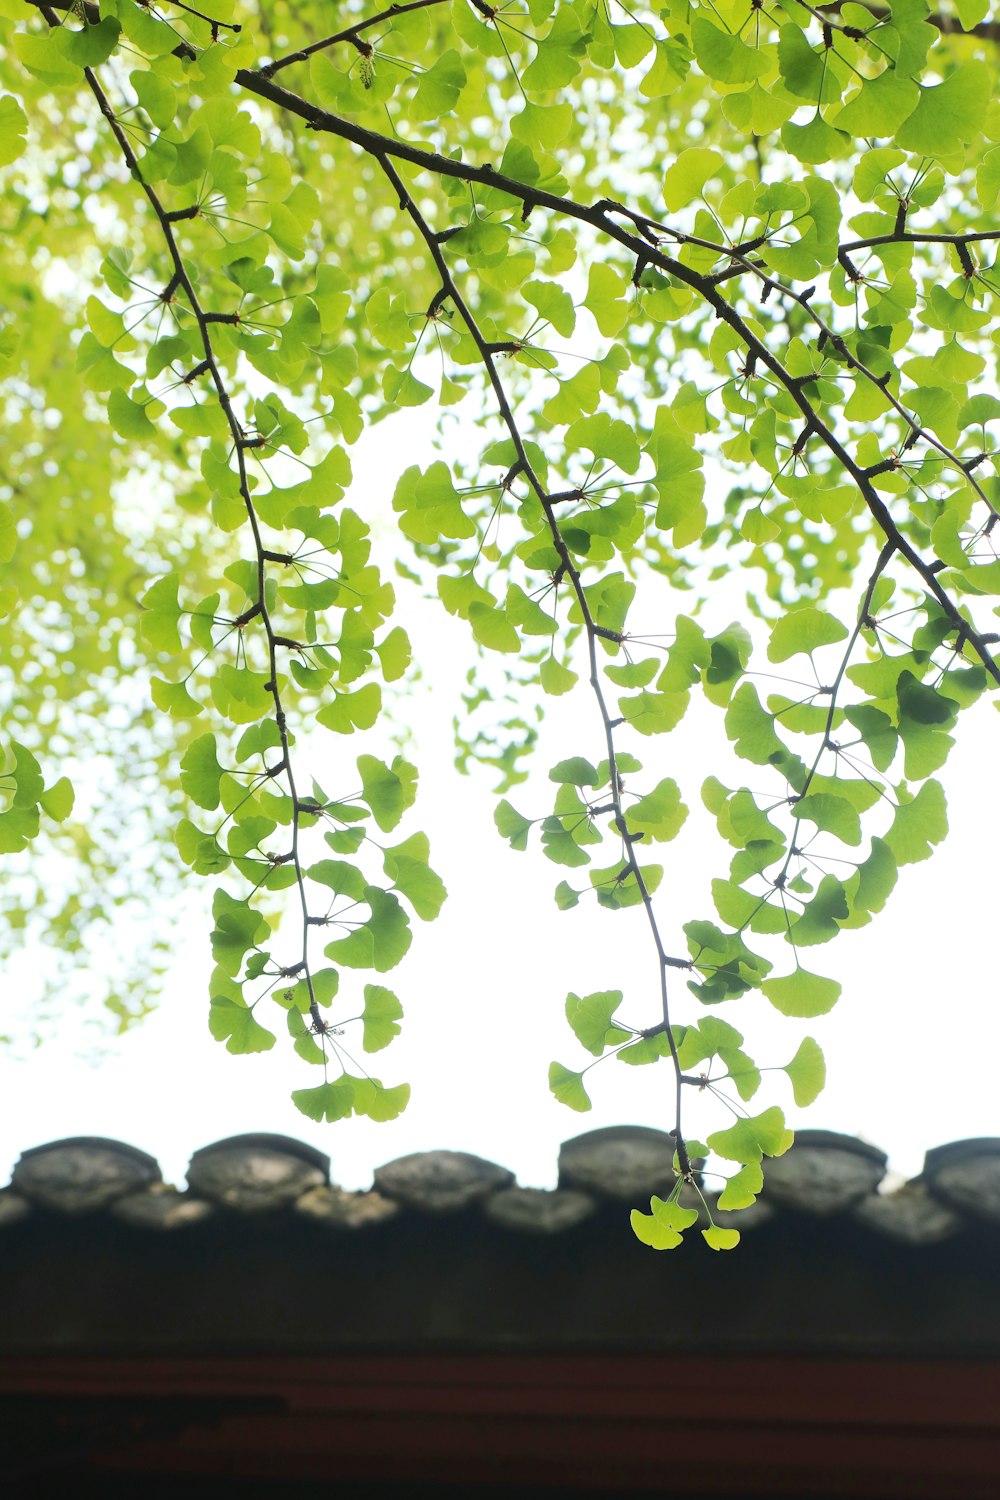 green leaves hang from the branches of a tree